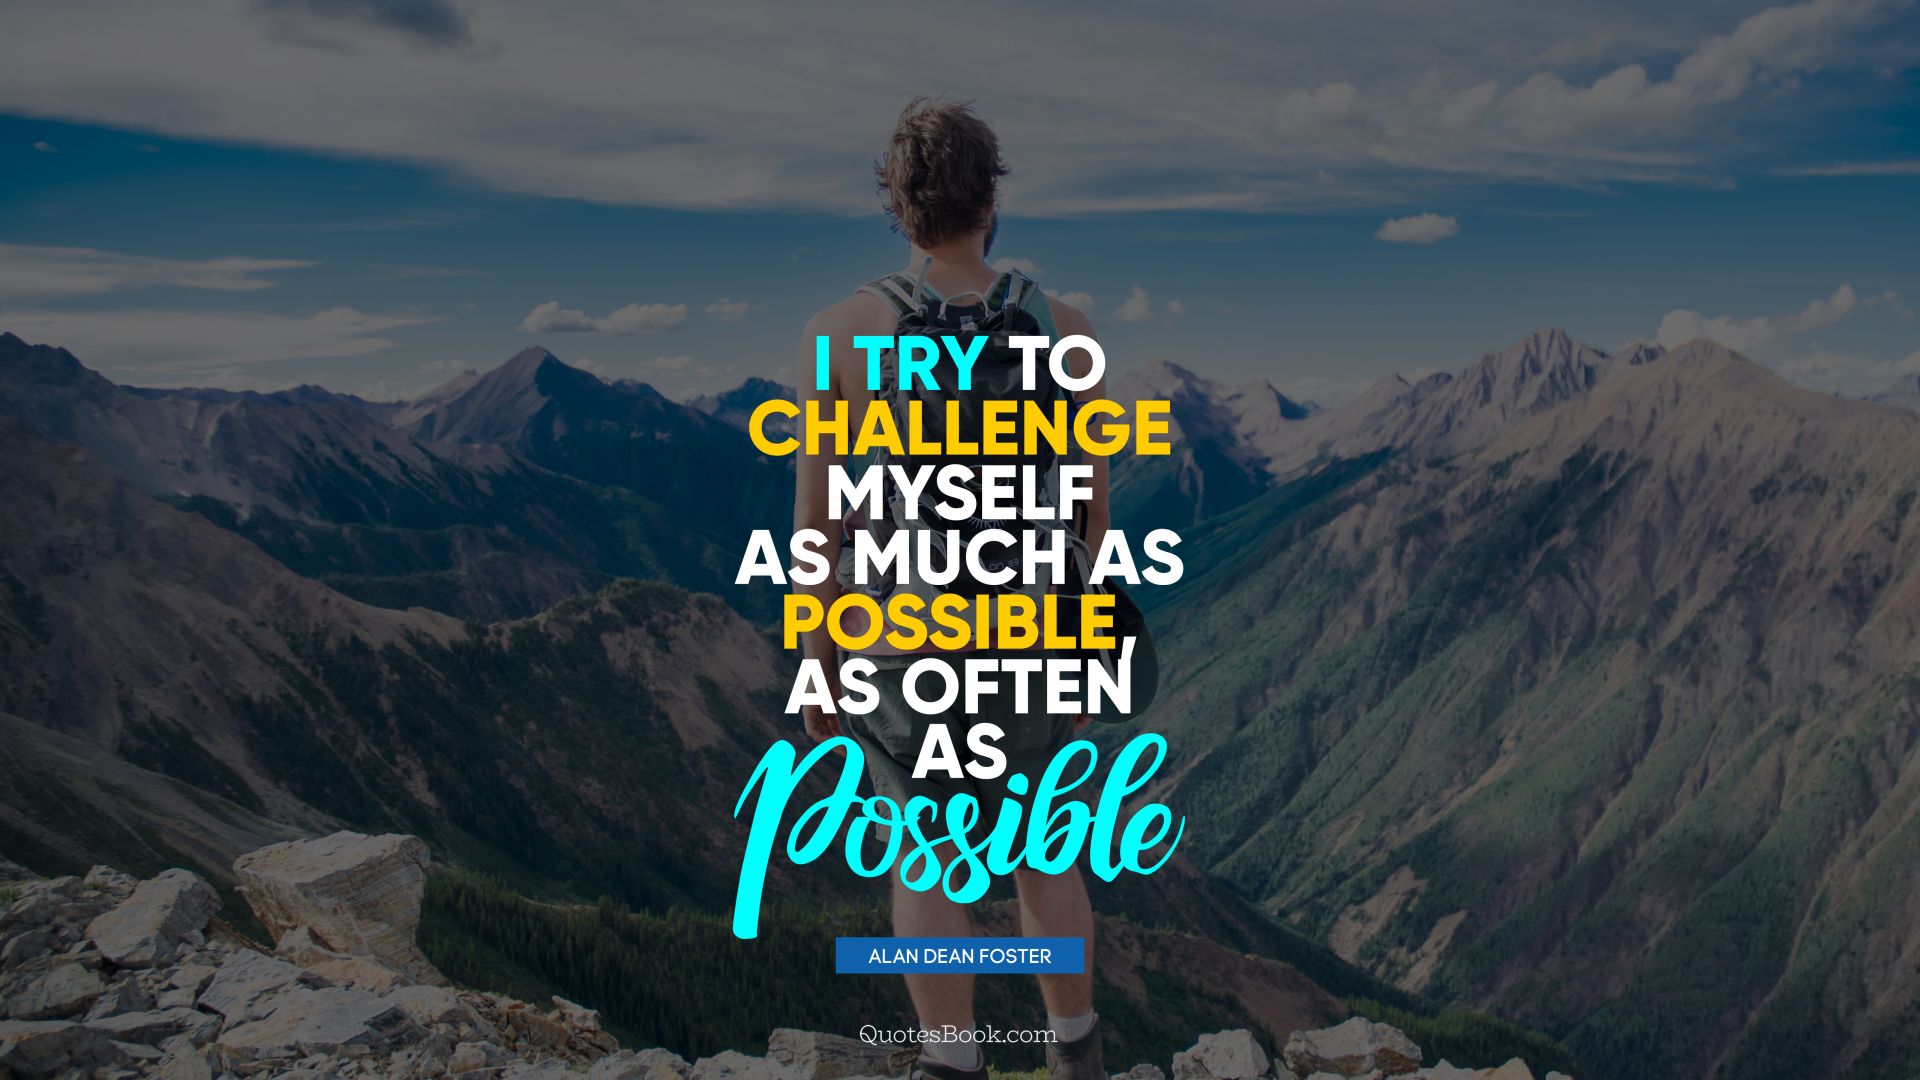 I try to challenge myself as much as possible, as often as possible. - Quote by Alan Dean Foster